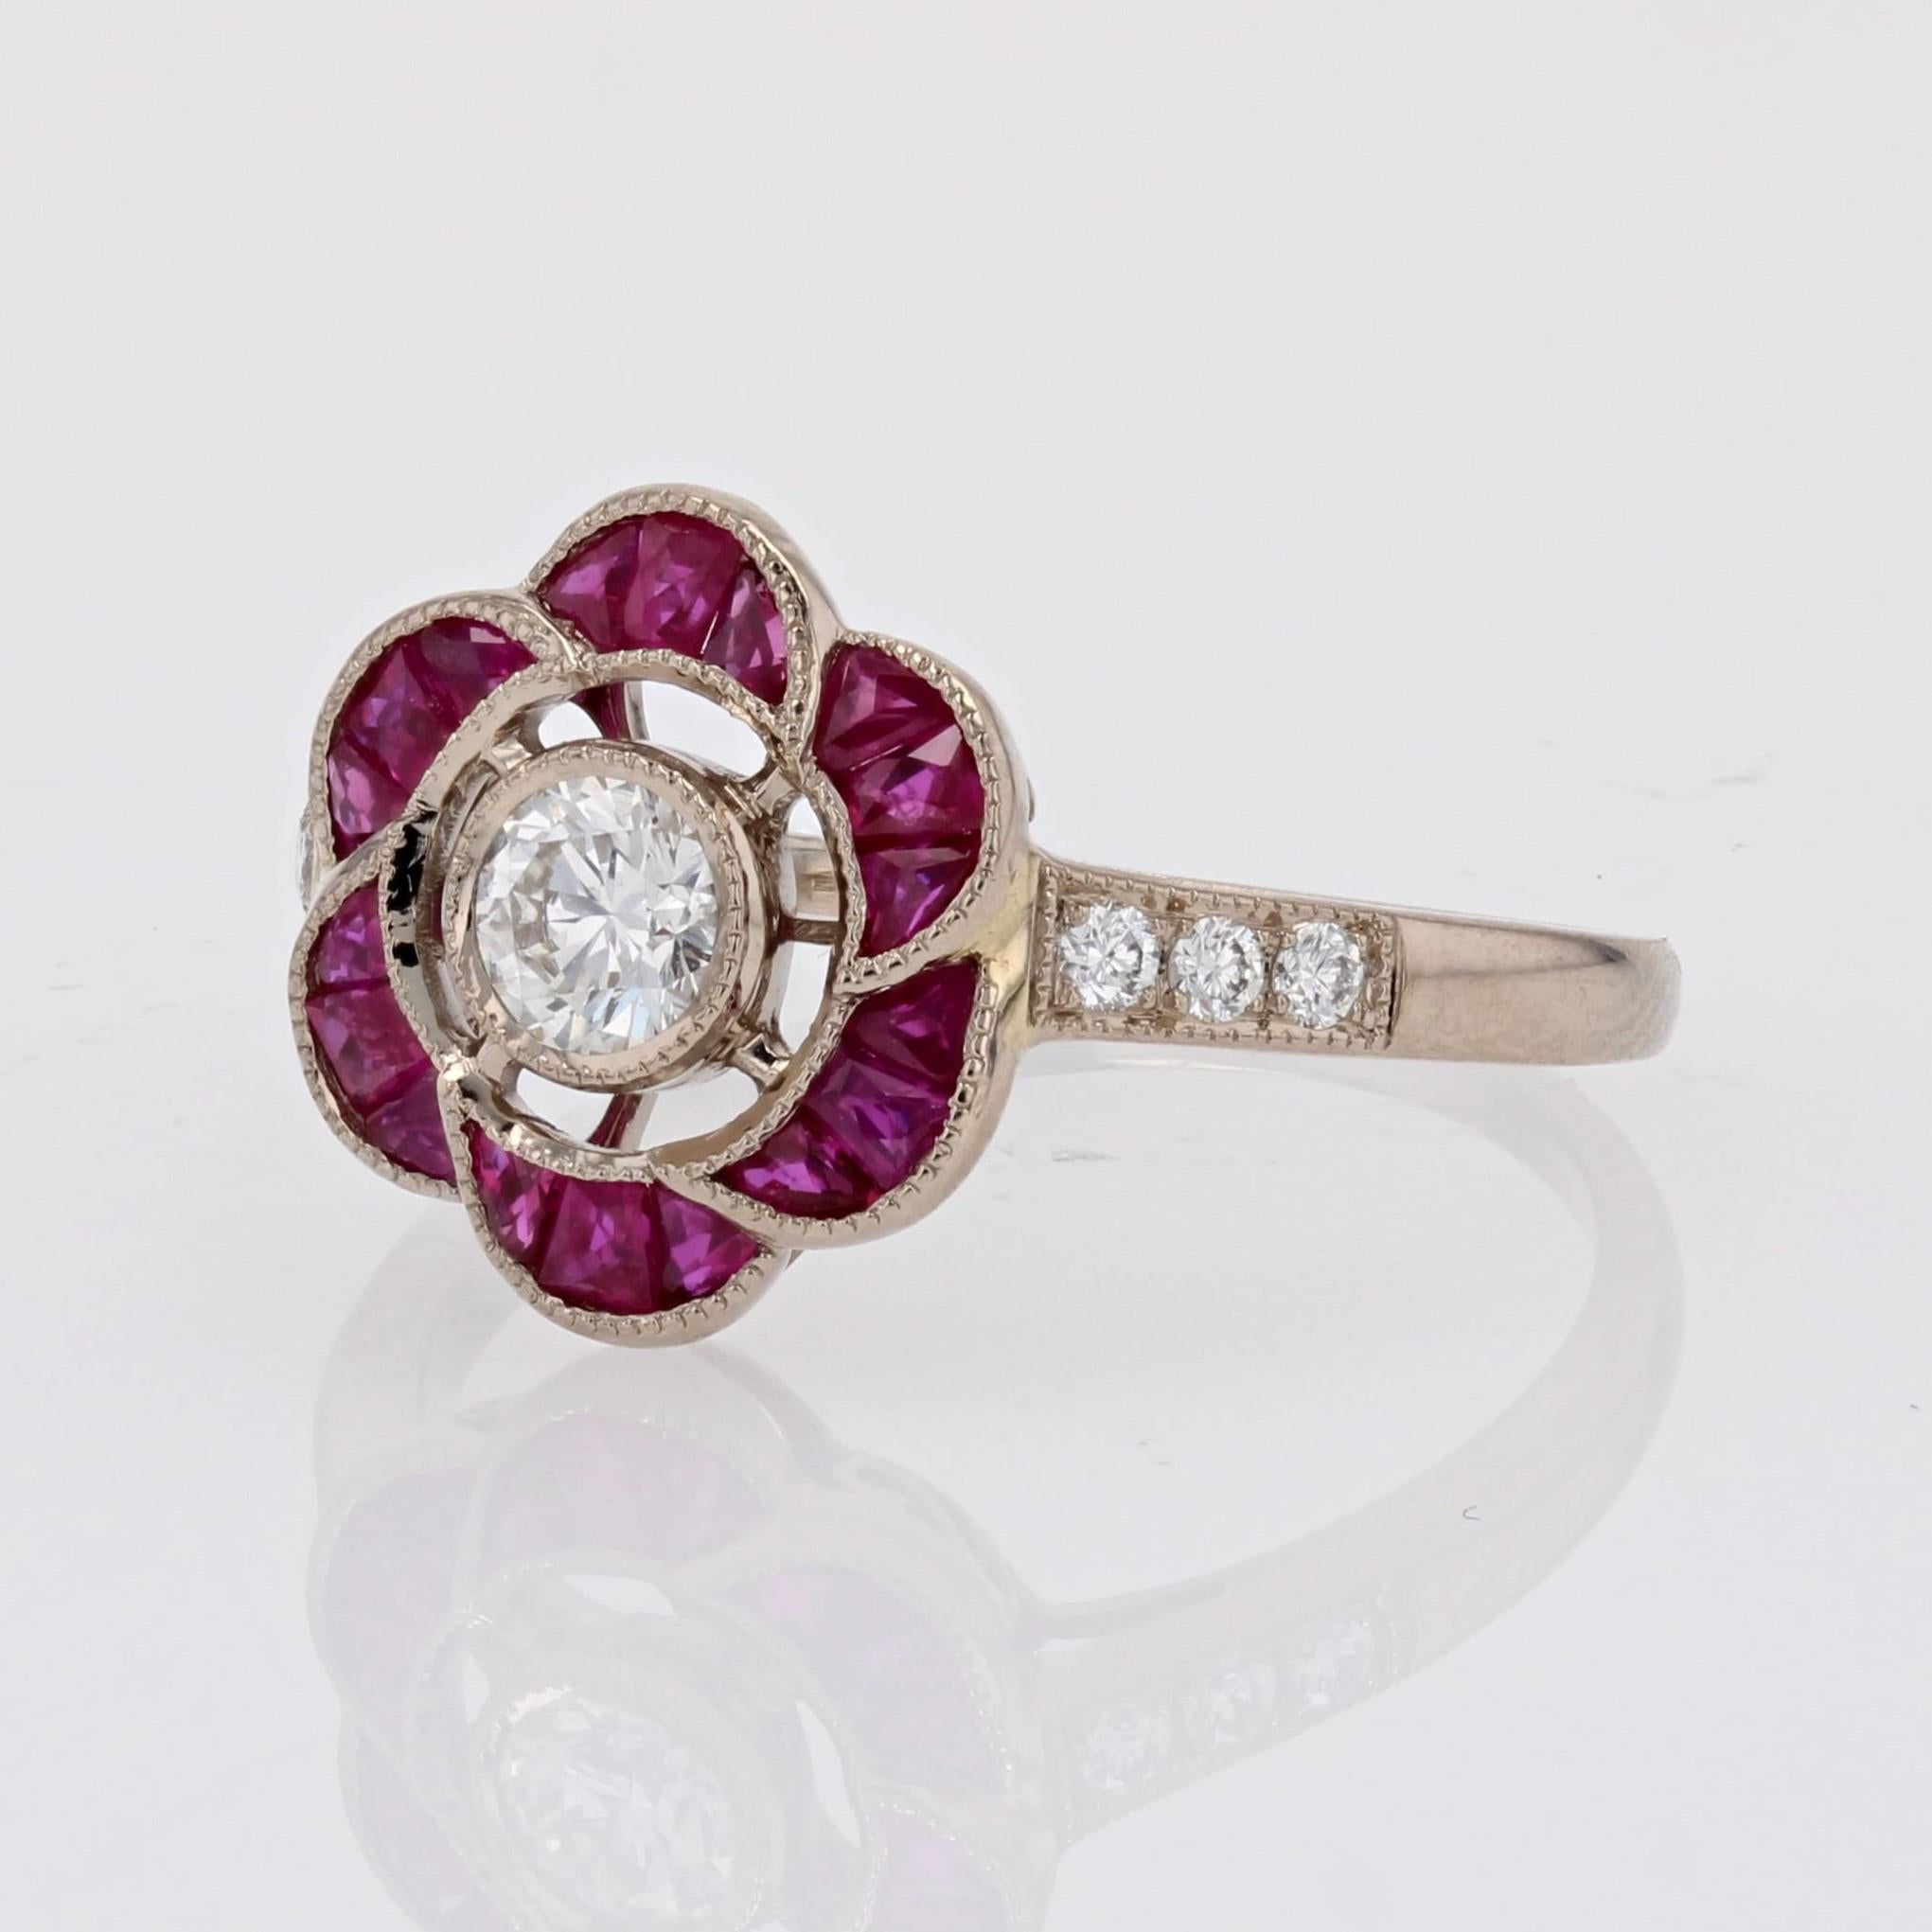 New Art Deco Style Calibrated Rubies Diamonds 18 Karat White Gold Flower Ring For Sale 3